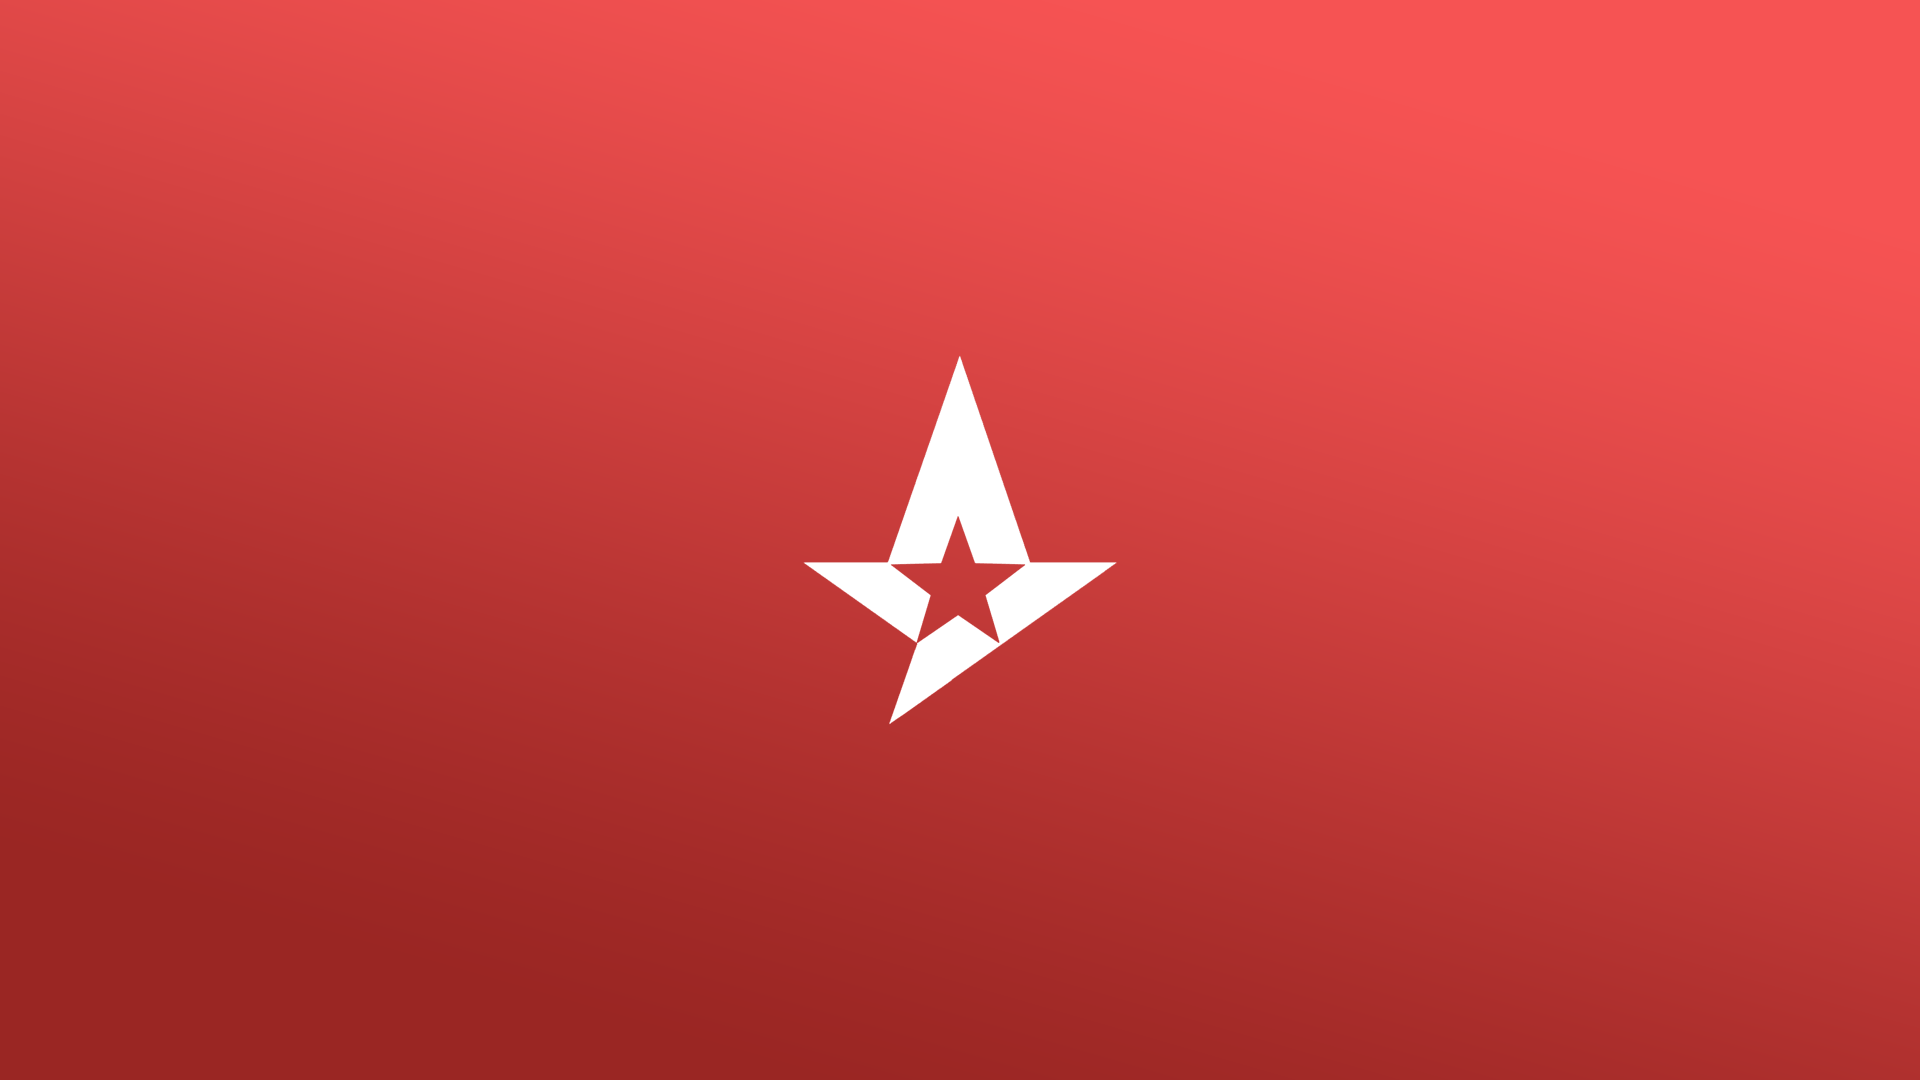 Team Astralis Wallpapers  Top Free Team Astralis Backgrounds   WallpaperAccess